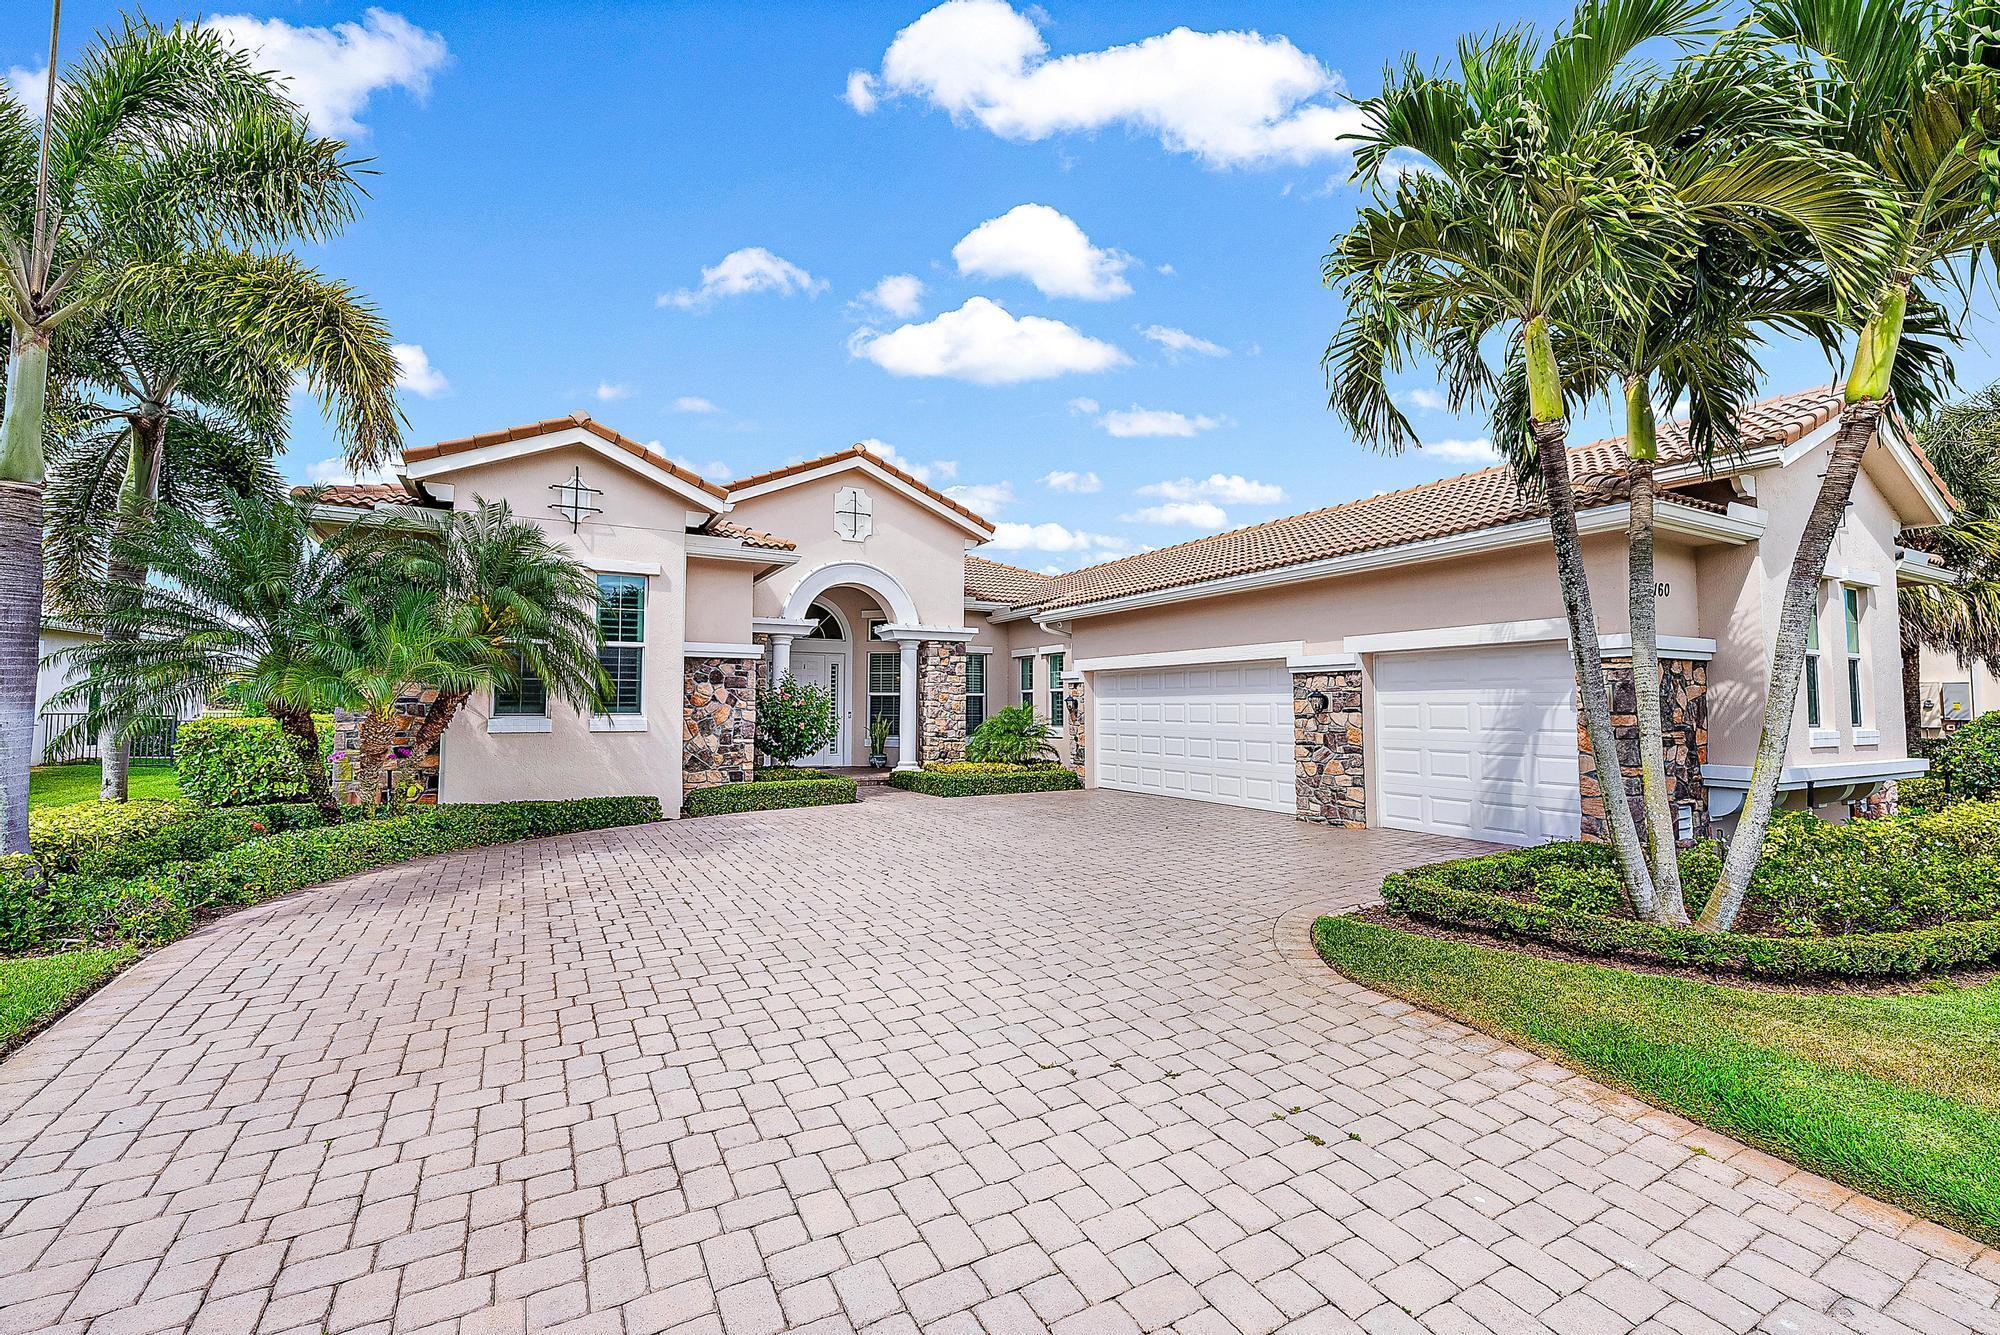 Prepare to be captivated by this exquisite residence in Jupiter Country Club, set against the backdrop of breathtaking golf and lake views.As you step into this remarkable home, you'll be greeted by an elegant seating room designed for entertaining with large open windows and the backyard as your conversation piece. The well-appointed gourmet kitchen leaves no detail overlooked featuring a hooded gas range, custom backsplash, center island, and spacious pantry. This culinary haven is perfectly complemented by a sunlit breakfast area and an expansive family room. Sliding glass doors seamlessly connect the indoor and outdoor living spaces, providing direct access to the covered lanai, where alfresco dining and relaxation await. a serene sitting area with a bay window, coffered ceiling, and two walk-in closets. The opulent master bath beckons with his-and-her vanities, a Roman tub, separate shower, and a private water closet.
This exceptional home further boasts three guest bedrooms, three additional full baths including a full cabana bath for added convenience. A private study with double doors offers a quiet space for work or reflection, while a separate laundry room ensures practicality. A three-car courtyard garage provides ample space for vehicles and storage while adding to the grandeur of the property.
Experience the unparalleled lifestyle of Jupiter Country Club, where luxury meets tranquility in an exclusive golf community. Schedule your visit today and discover the unmatched elegance and sophistication of this best-selling extended Castania model.